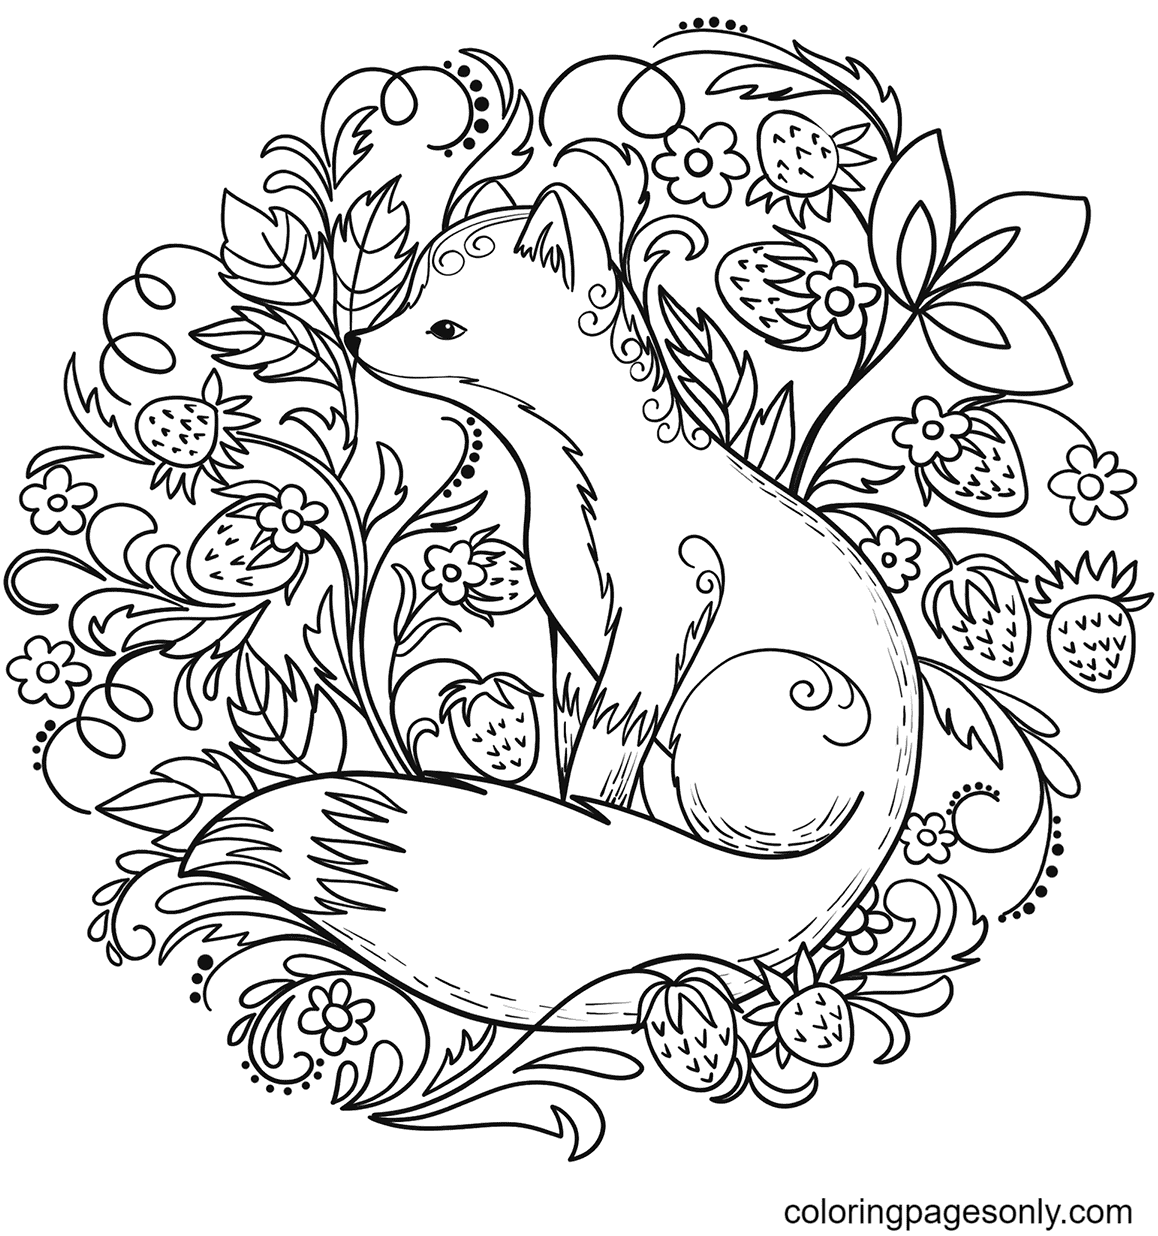 Fox And Strawberry Coloring Pages